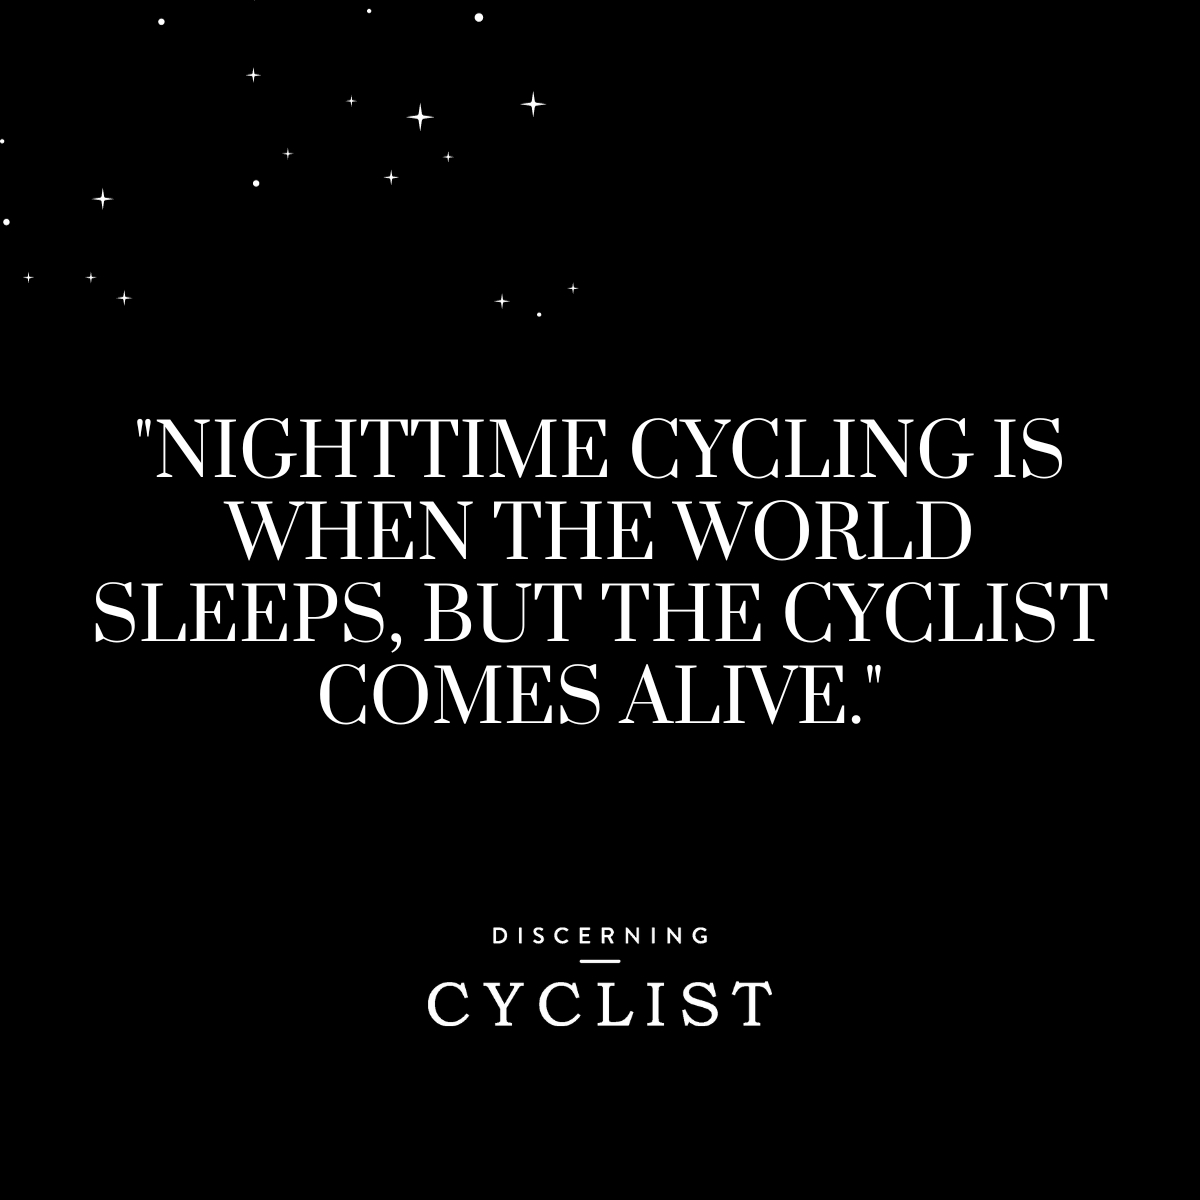 "Nighttime cycling is when the world sleeps, but the cyclist comes alive."